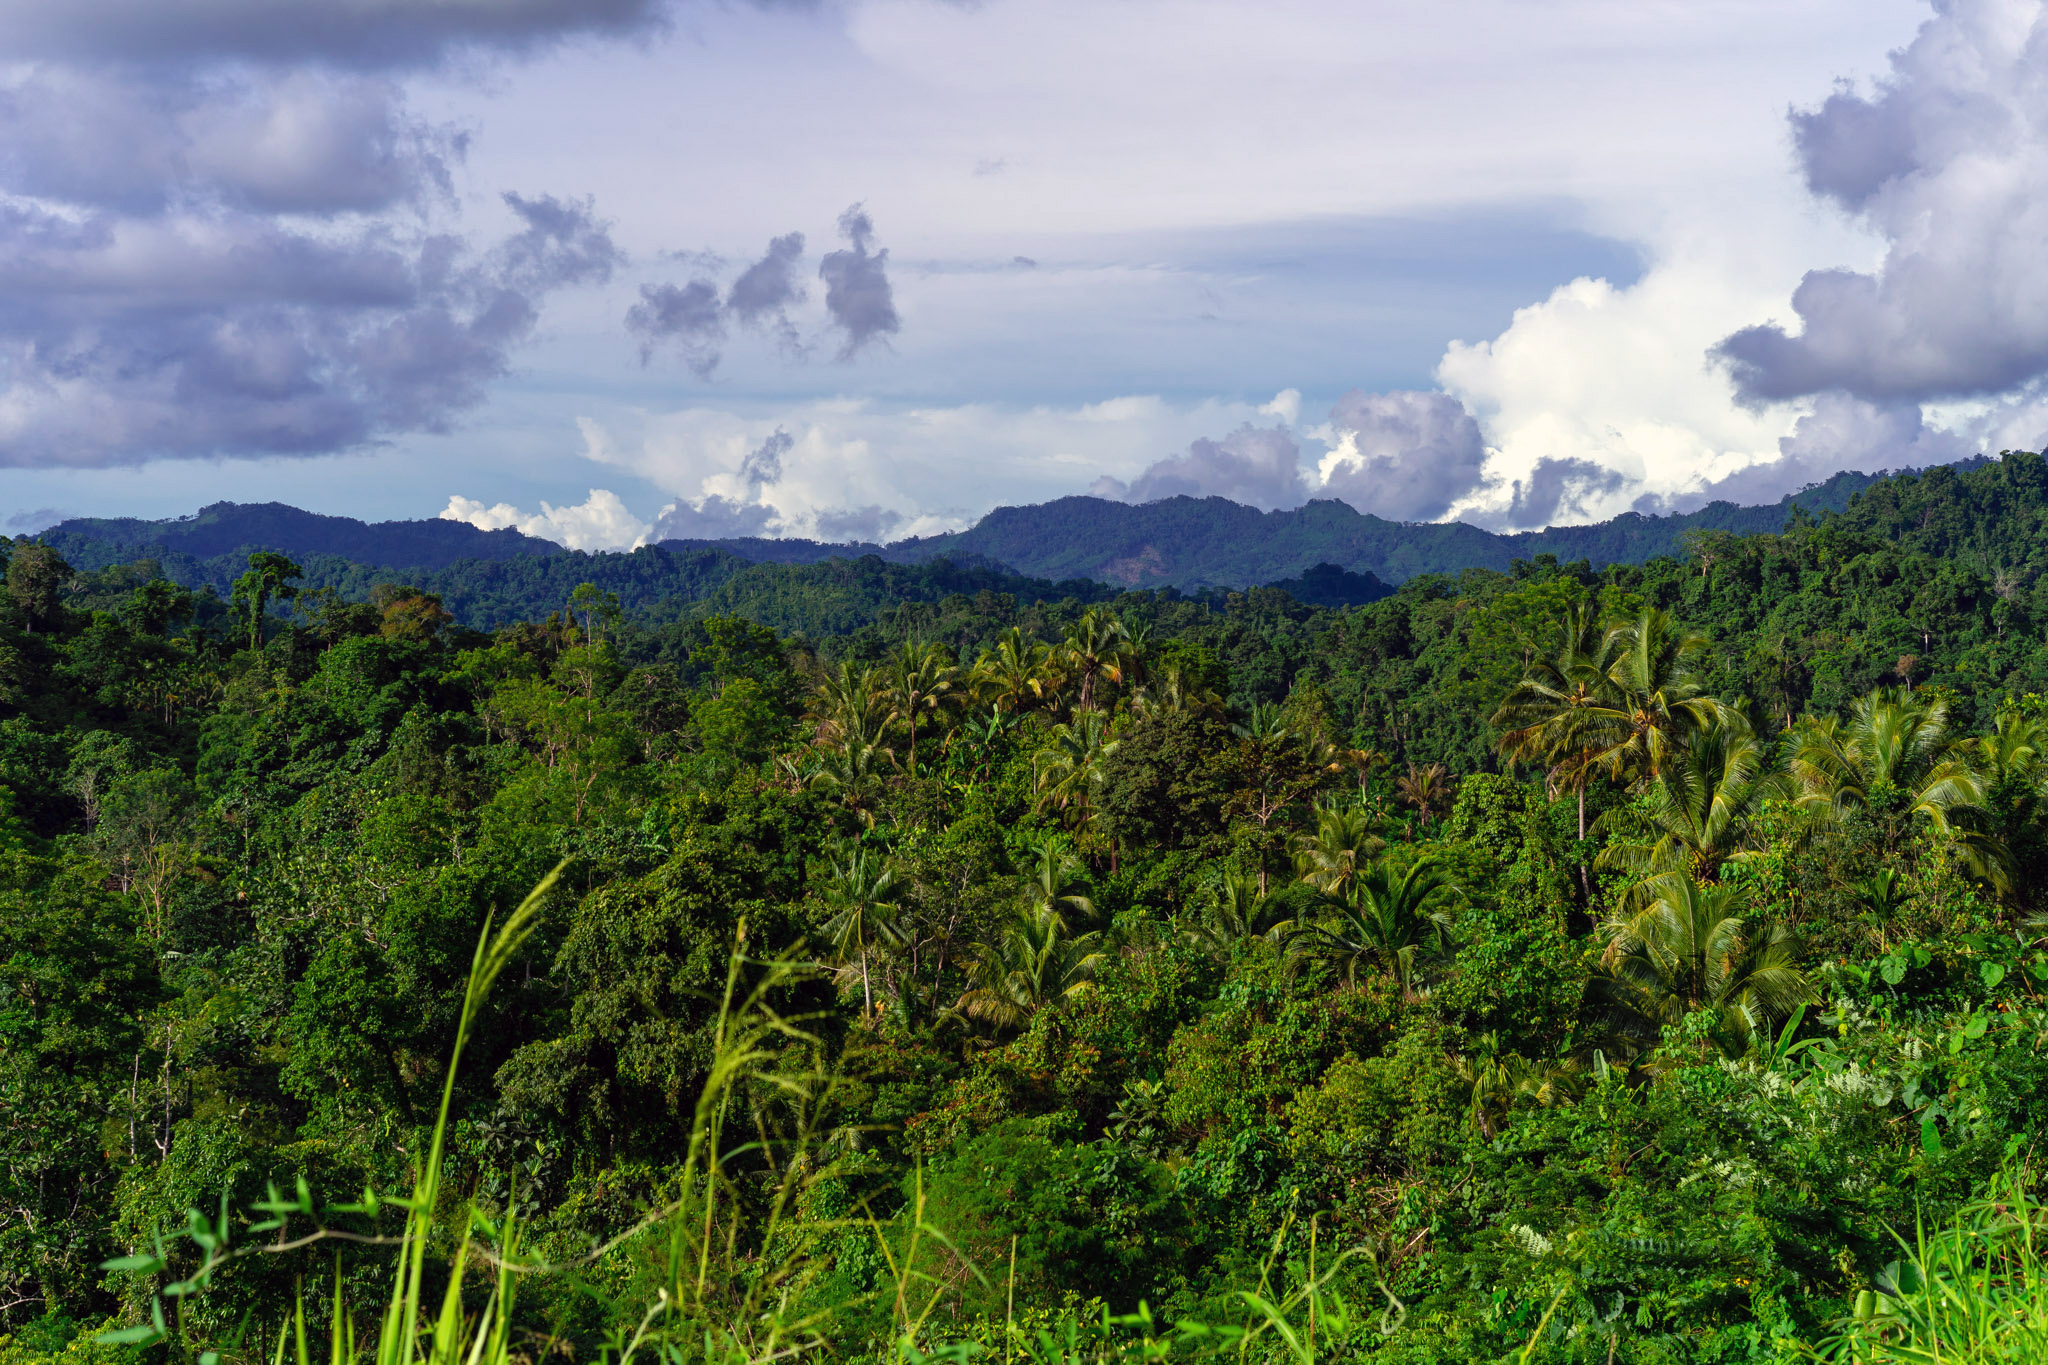 View of mature forest and mountains taken from the Lae-Madang Highway at Morobe Province, Papua New Guinea. (Image: Zacky Ezedin)